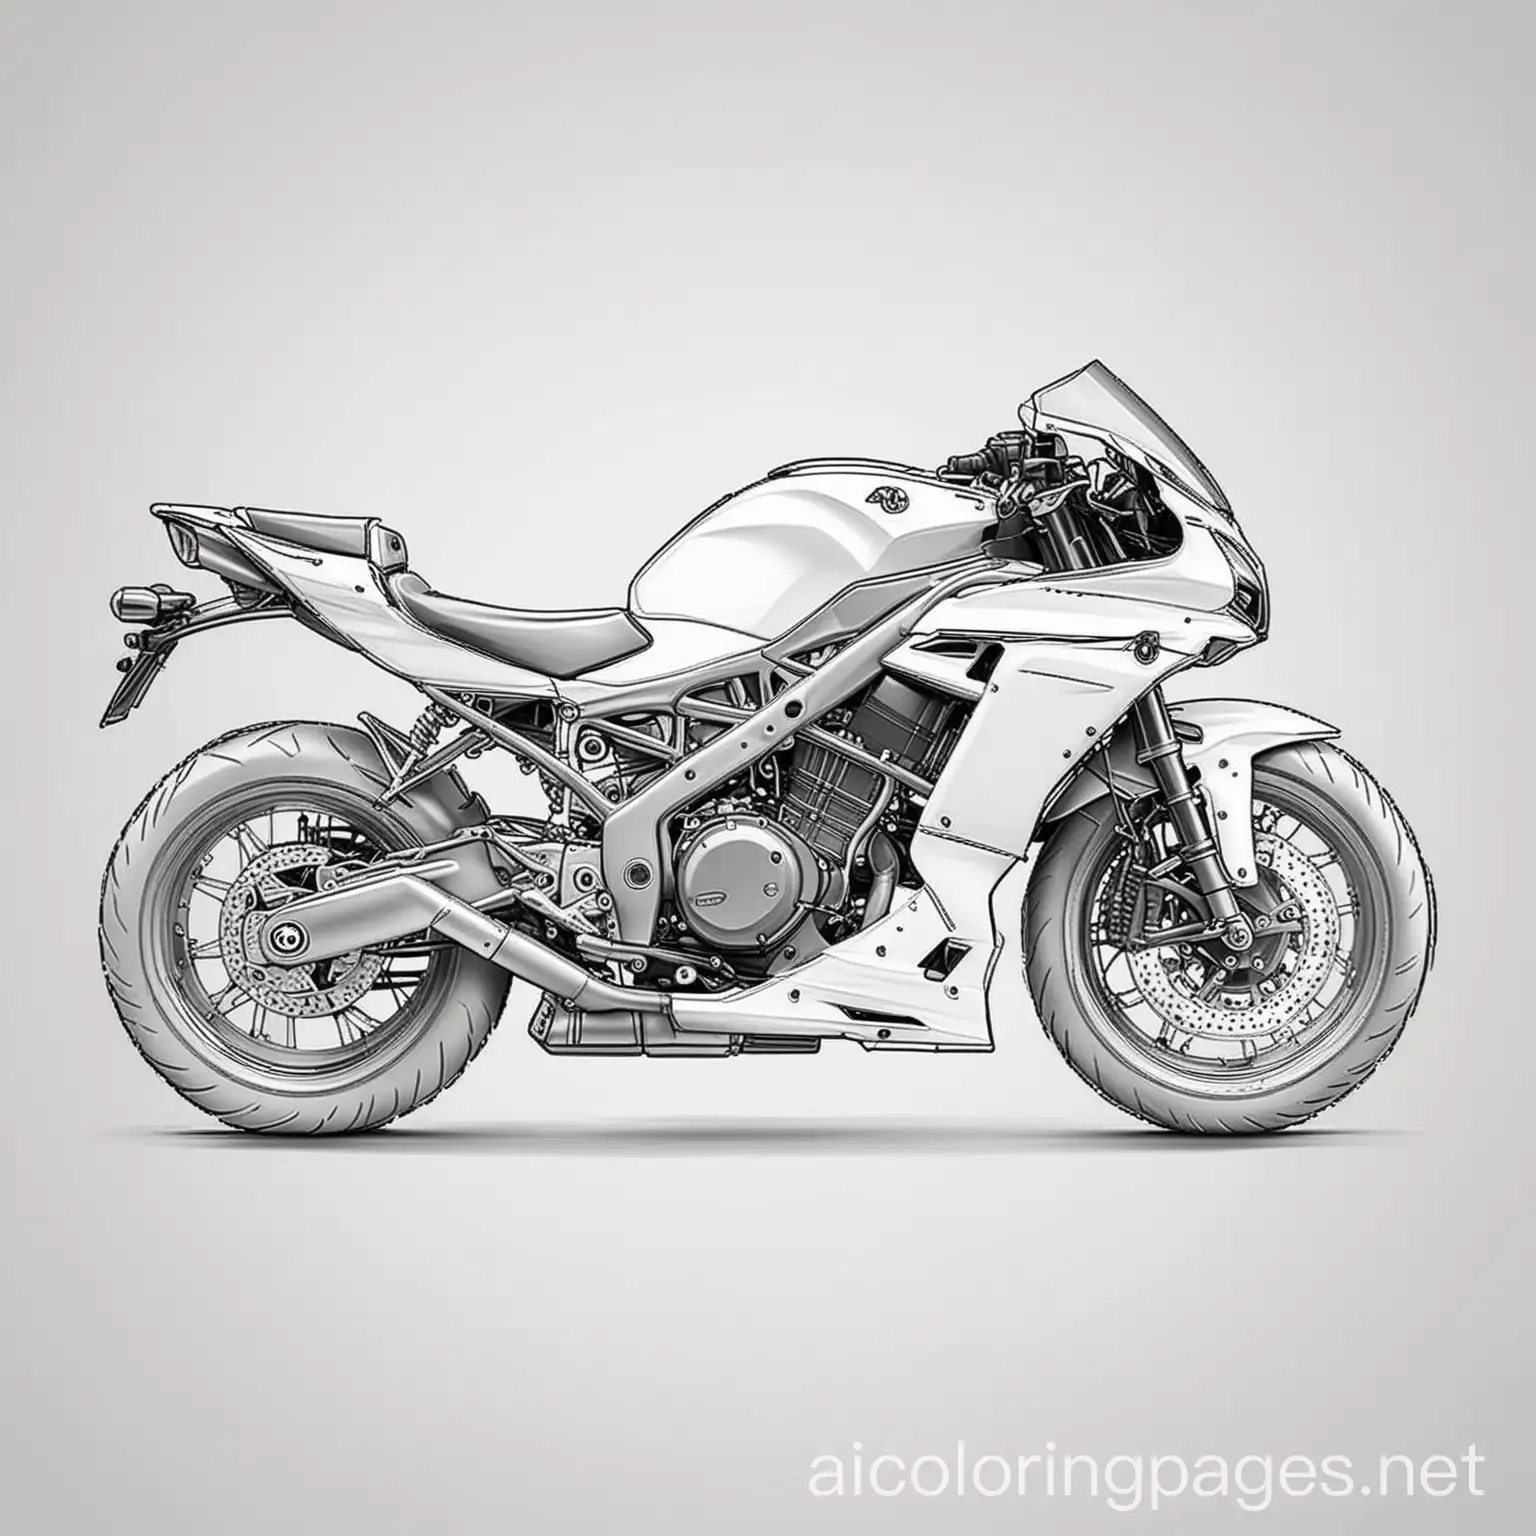 Simple-Motorcycle-Coloring-Page-for-Kids-Black-and-White-Line-Art-on-White-Background